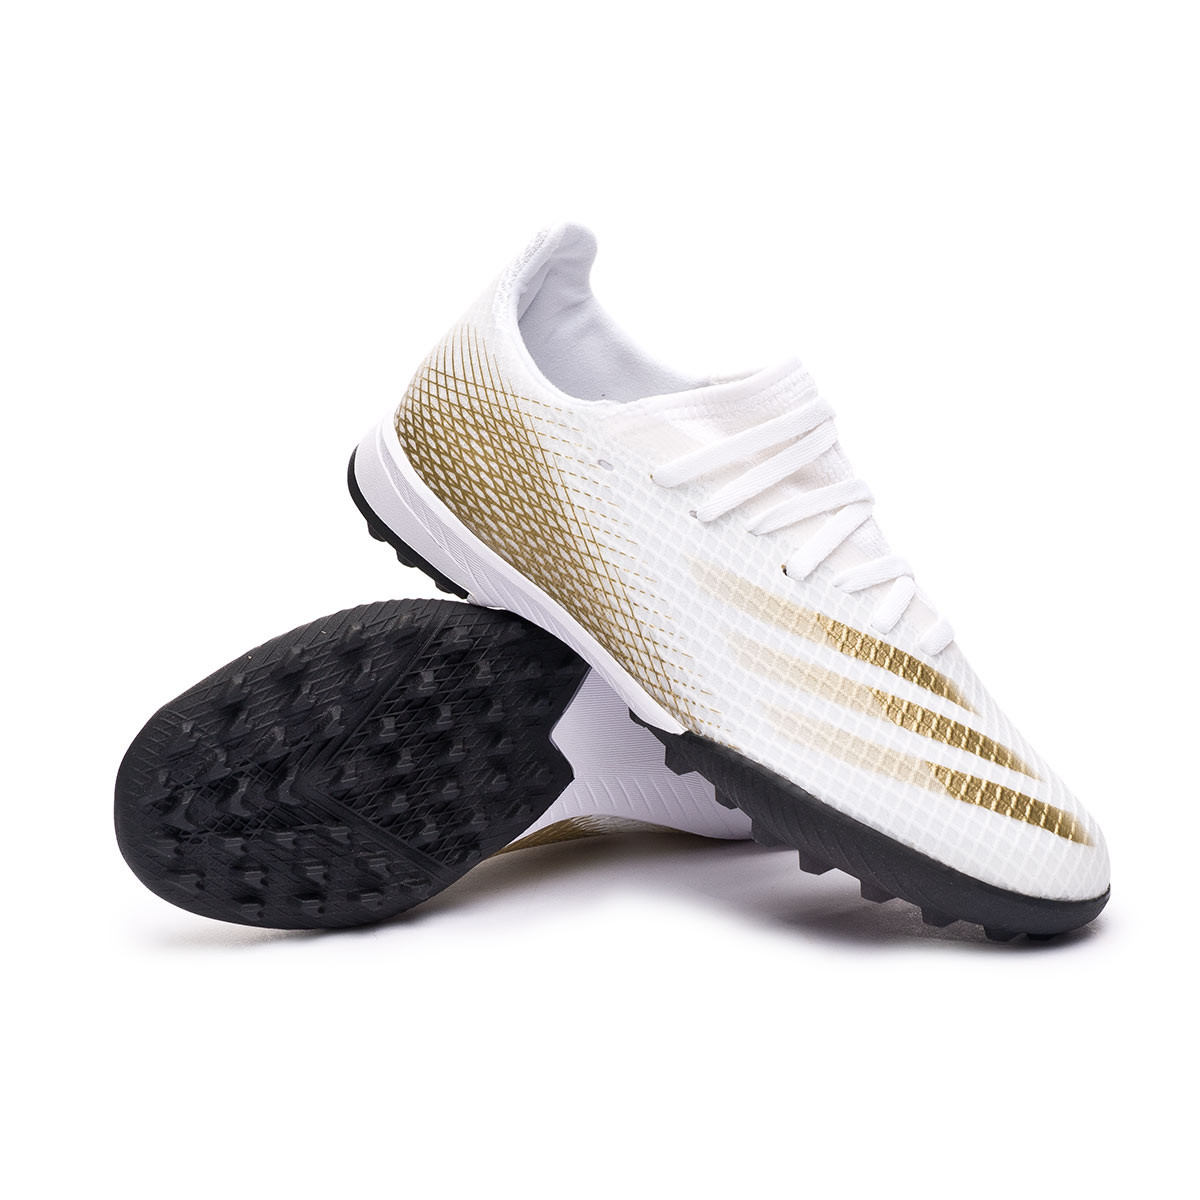 Football Boots adidas X Ghosted.3 Turf 